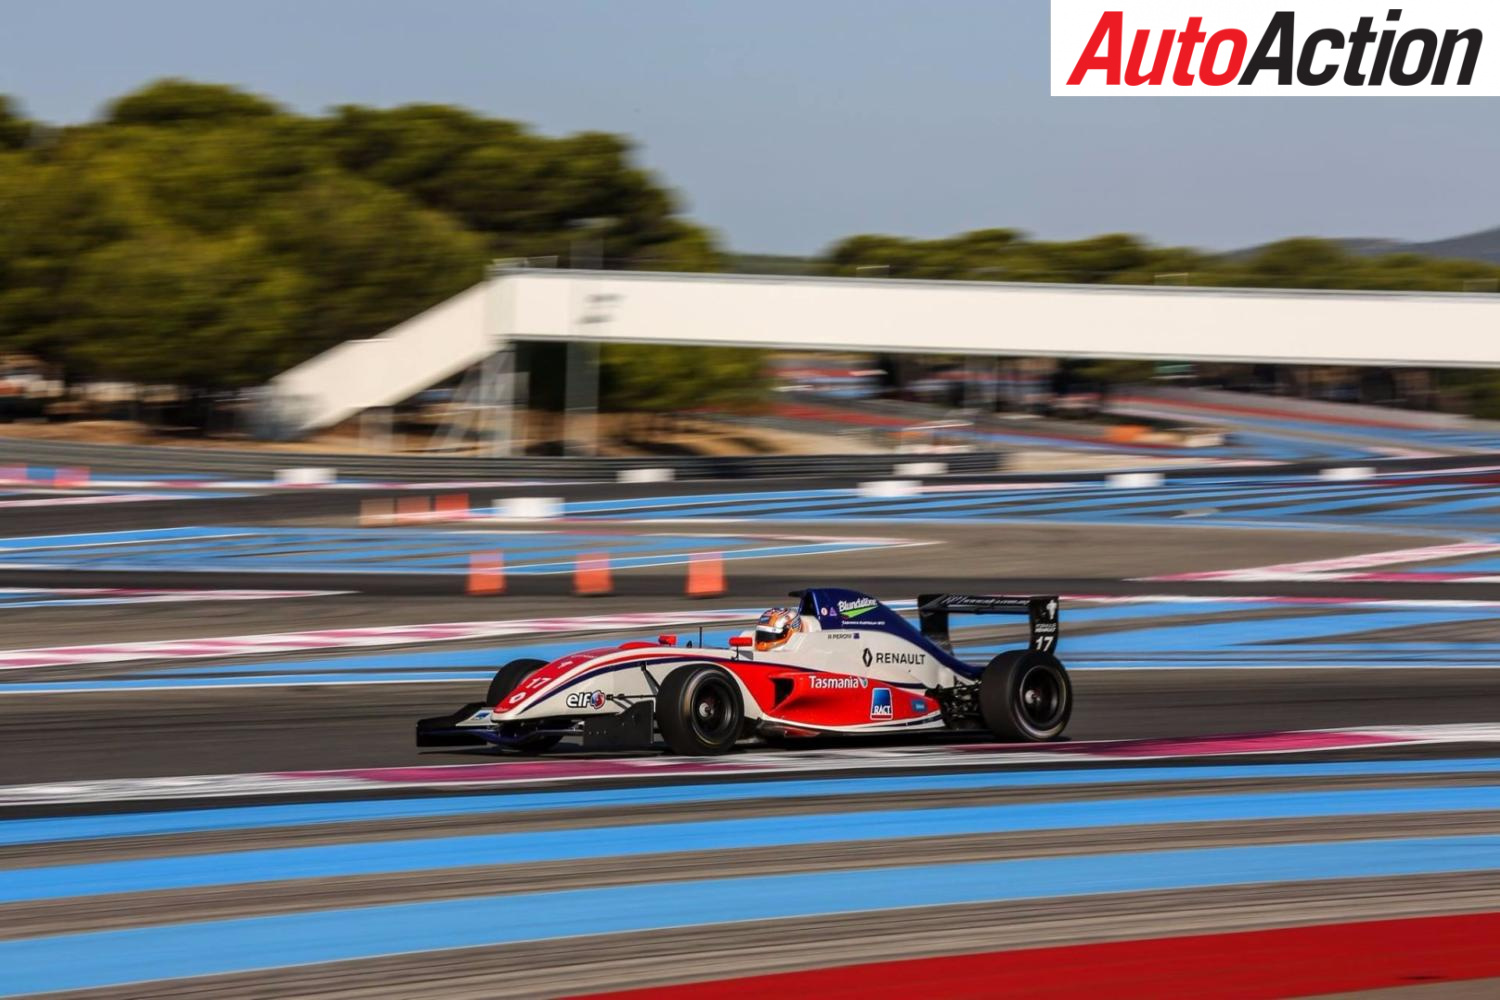 Alex Peroni charges through Formula Renault Eurocup field - Photo: Supplied